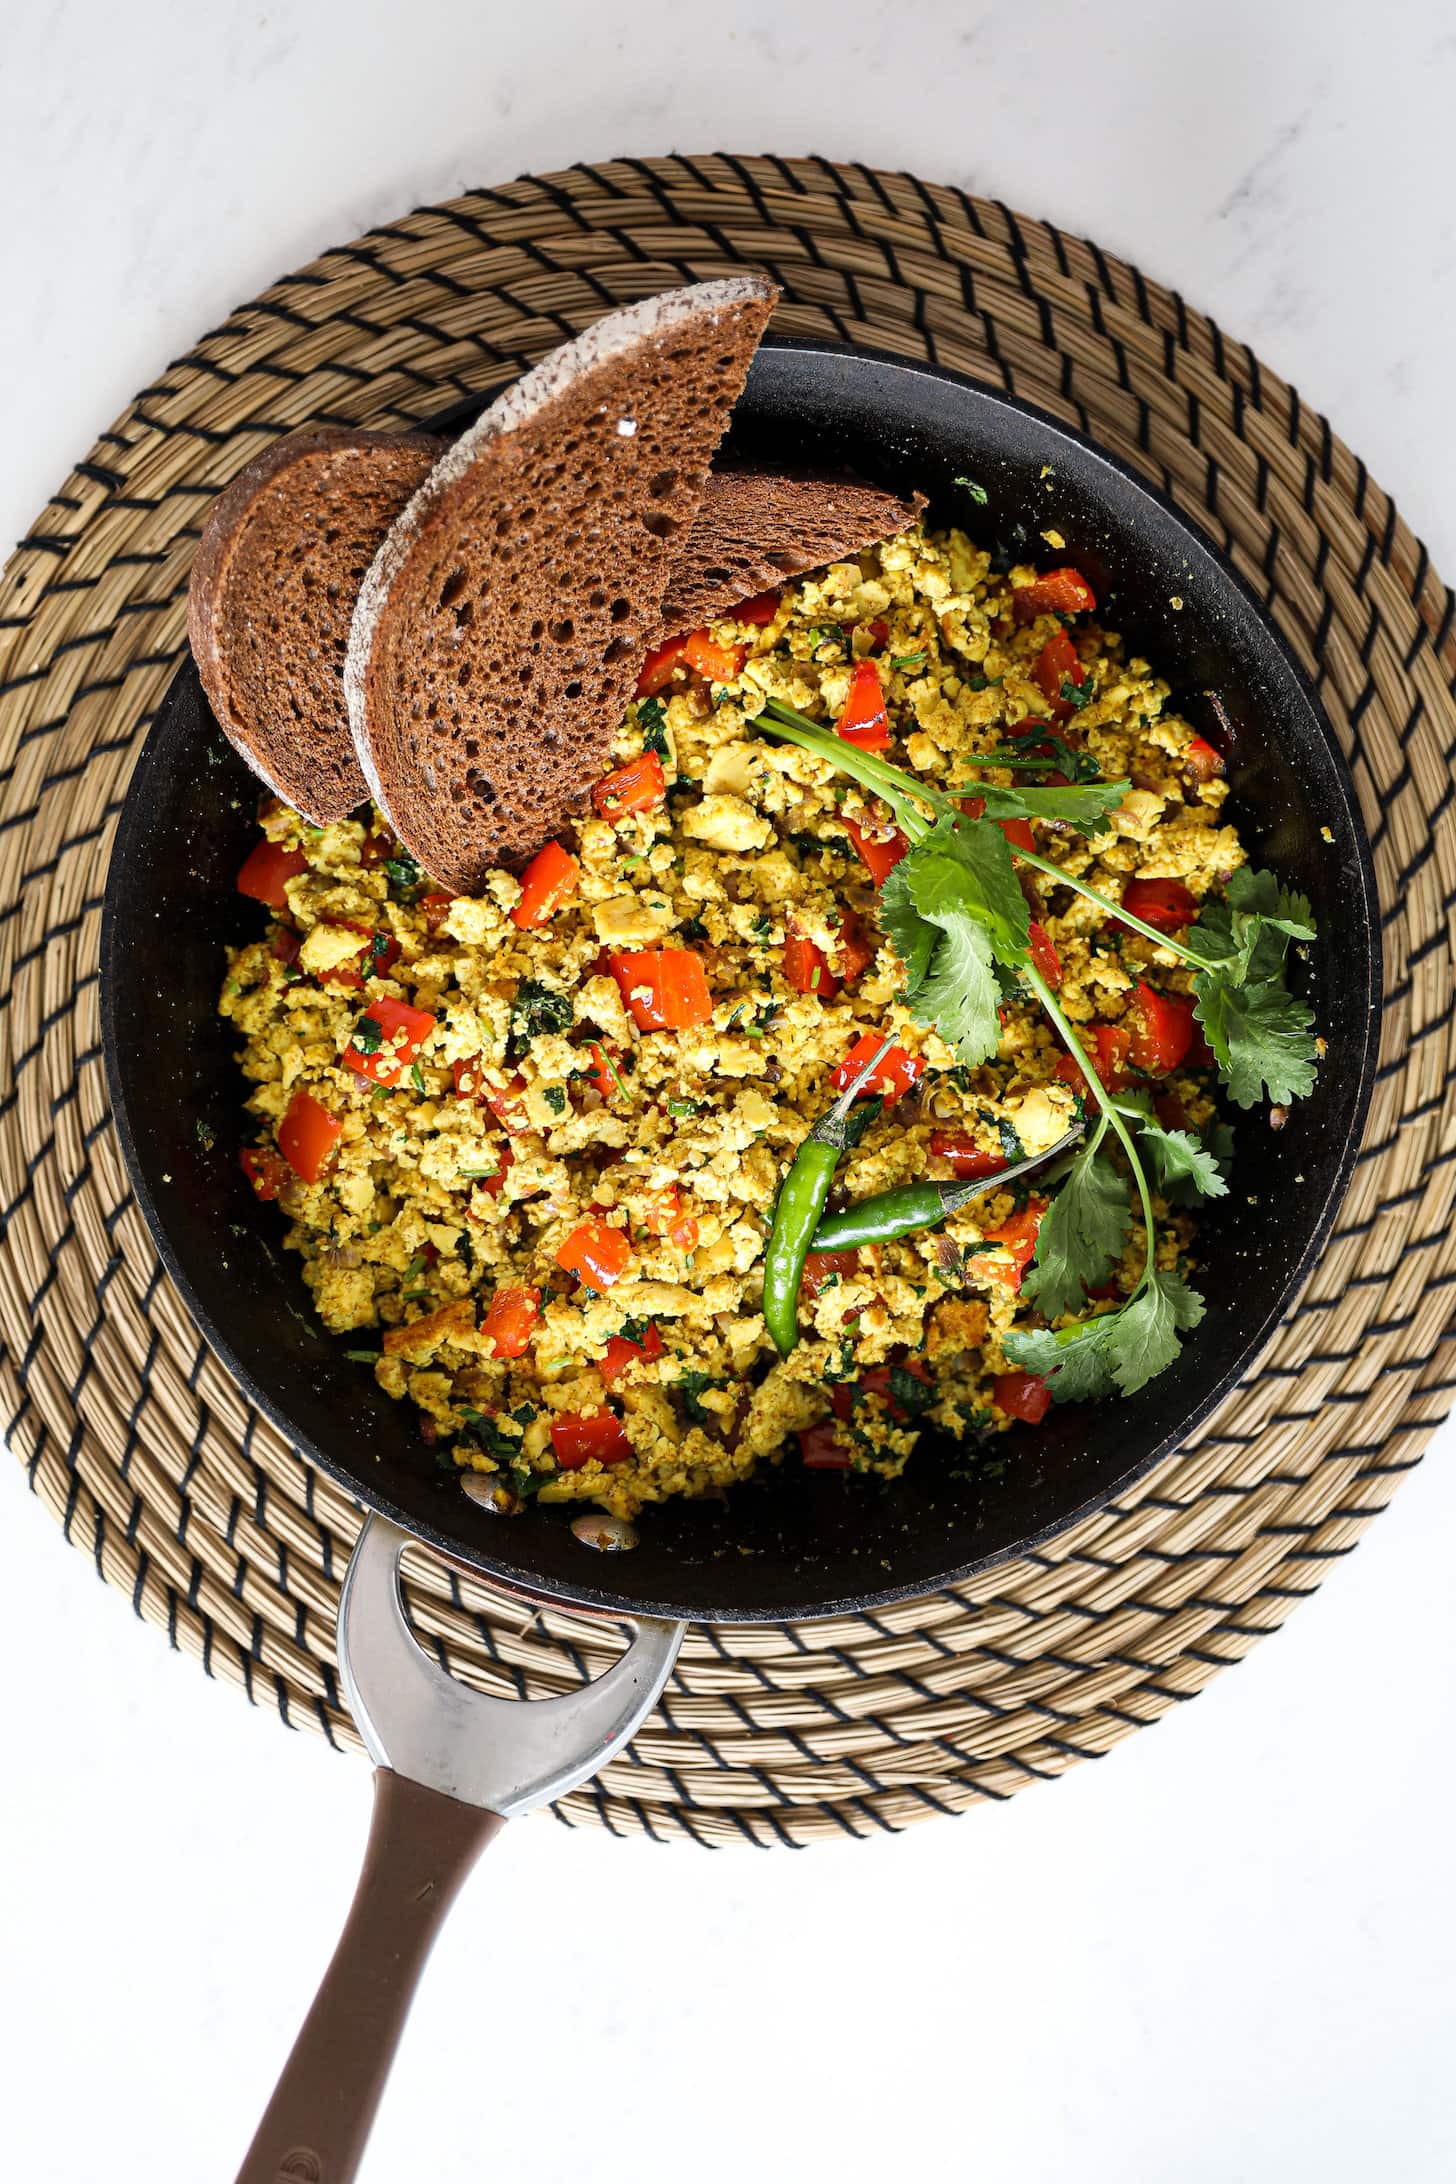 Overhead shot of a pan of scramble with red pepper cubes topped with cilantro and green chilli and two slices of pumpernickel bread placed on top.